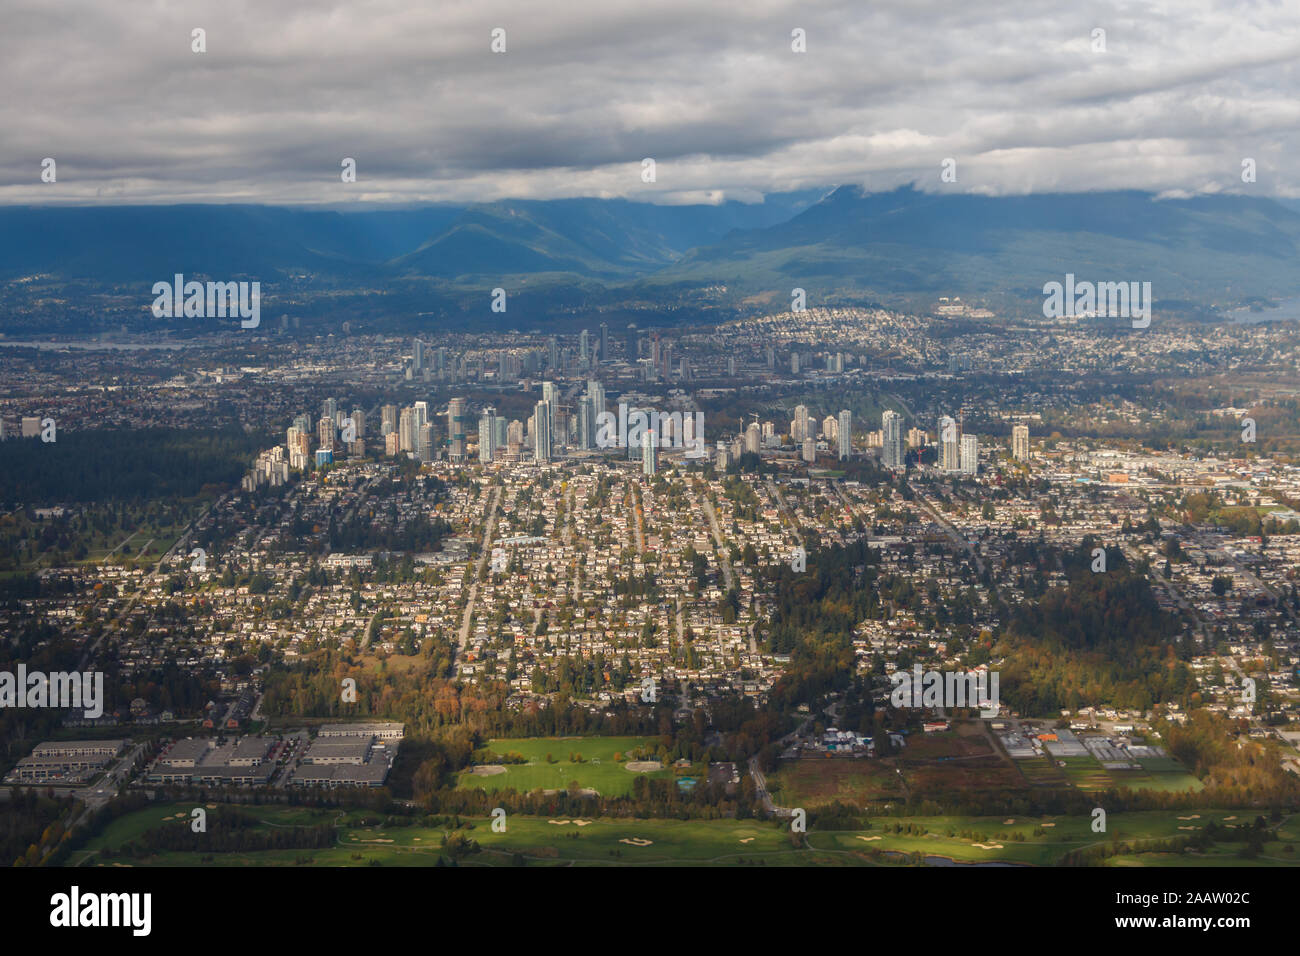 Vancouver Neighbourhoods of Burnaby and Brentwood from the air Stock Photo